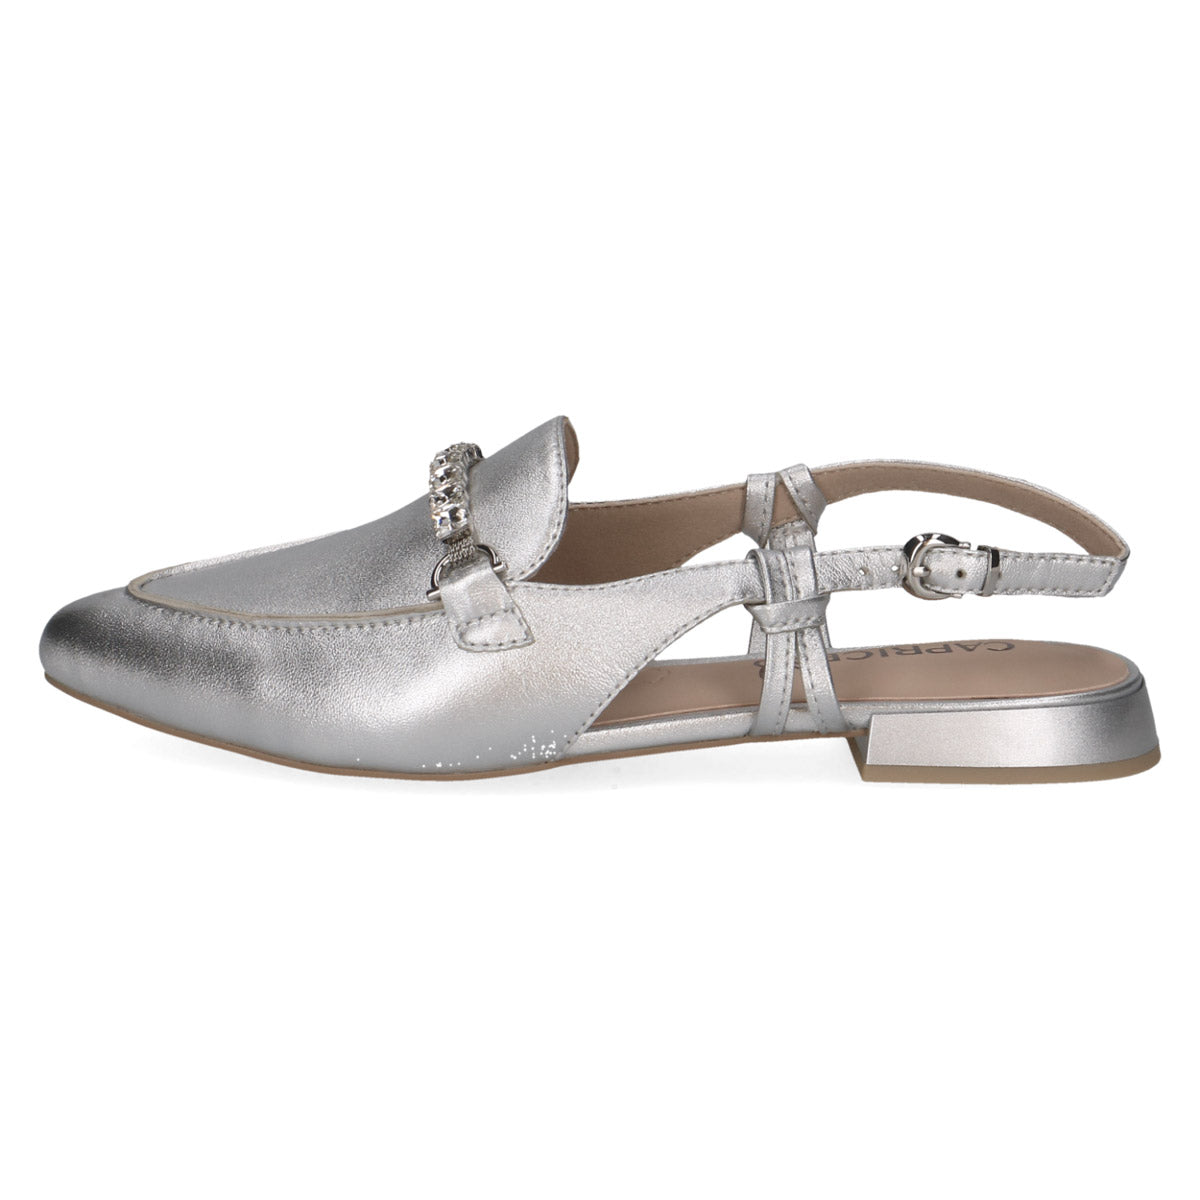 Caprice Stylish Silver Heel Shoes with Diamante Detail